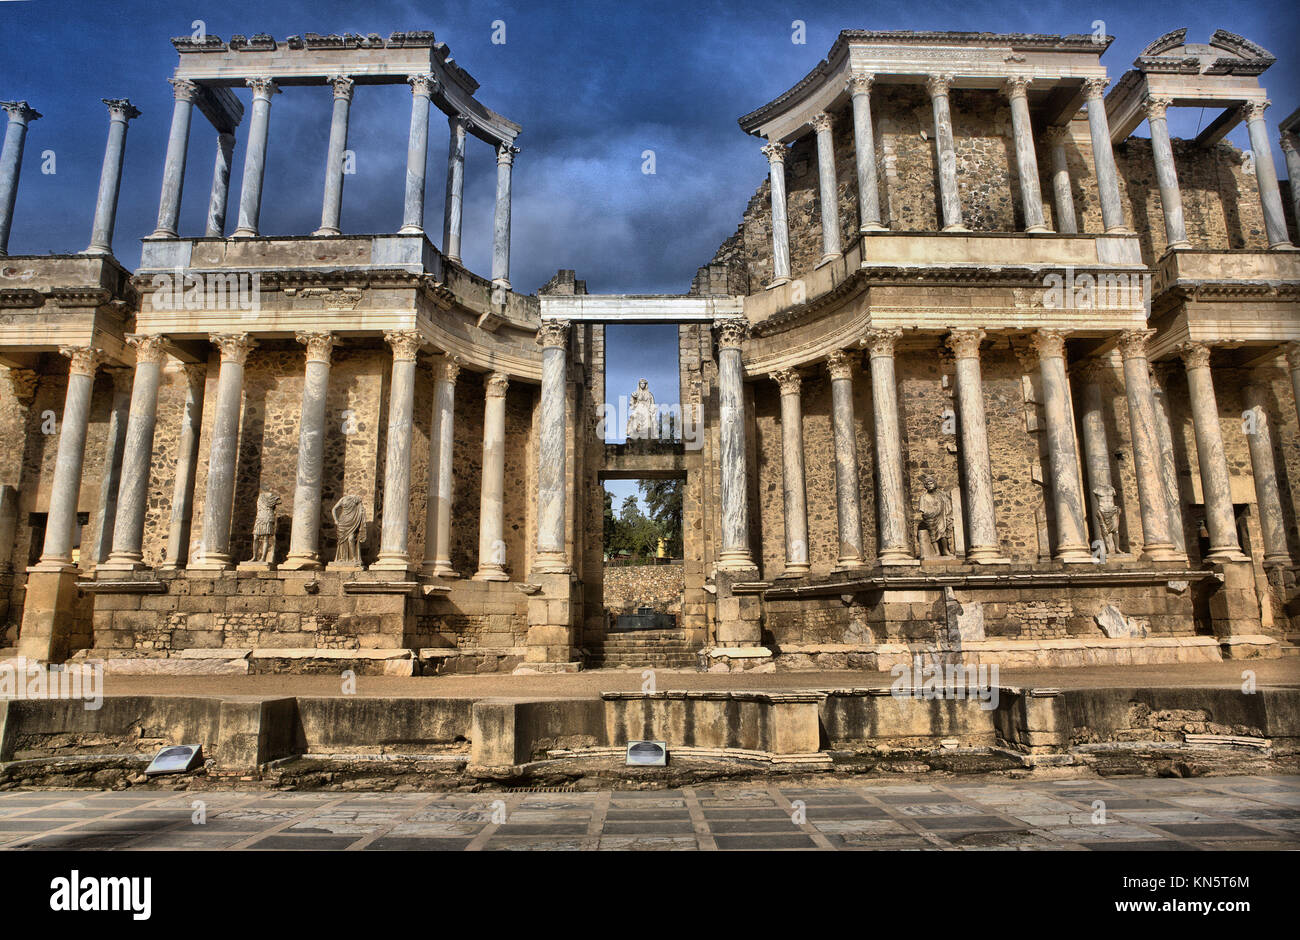 Roman theatre, located in the archaeological ensemble of Mérida, one of the largest and most extensive archaeological sites in Spain. Stock Photo